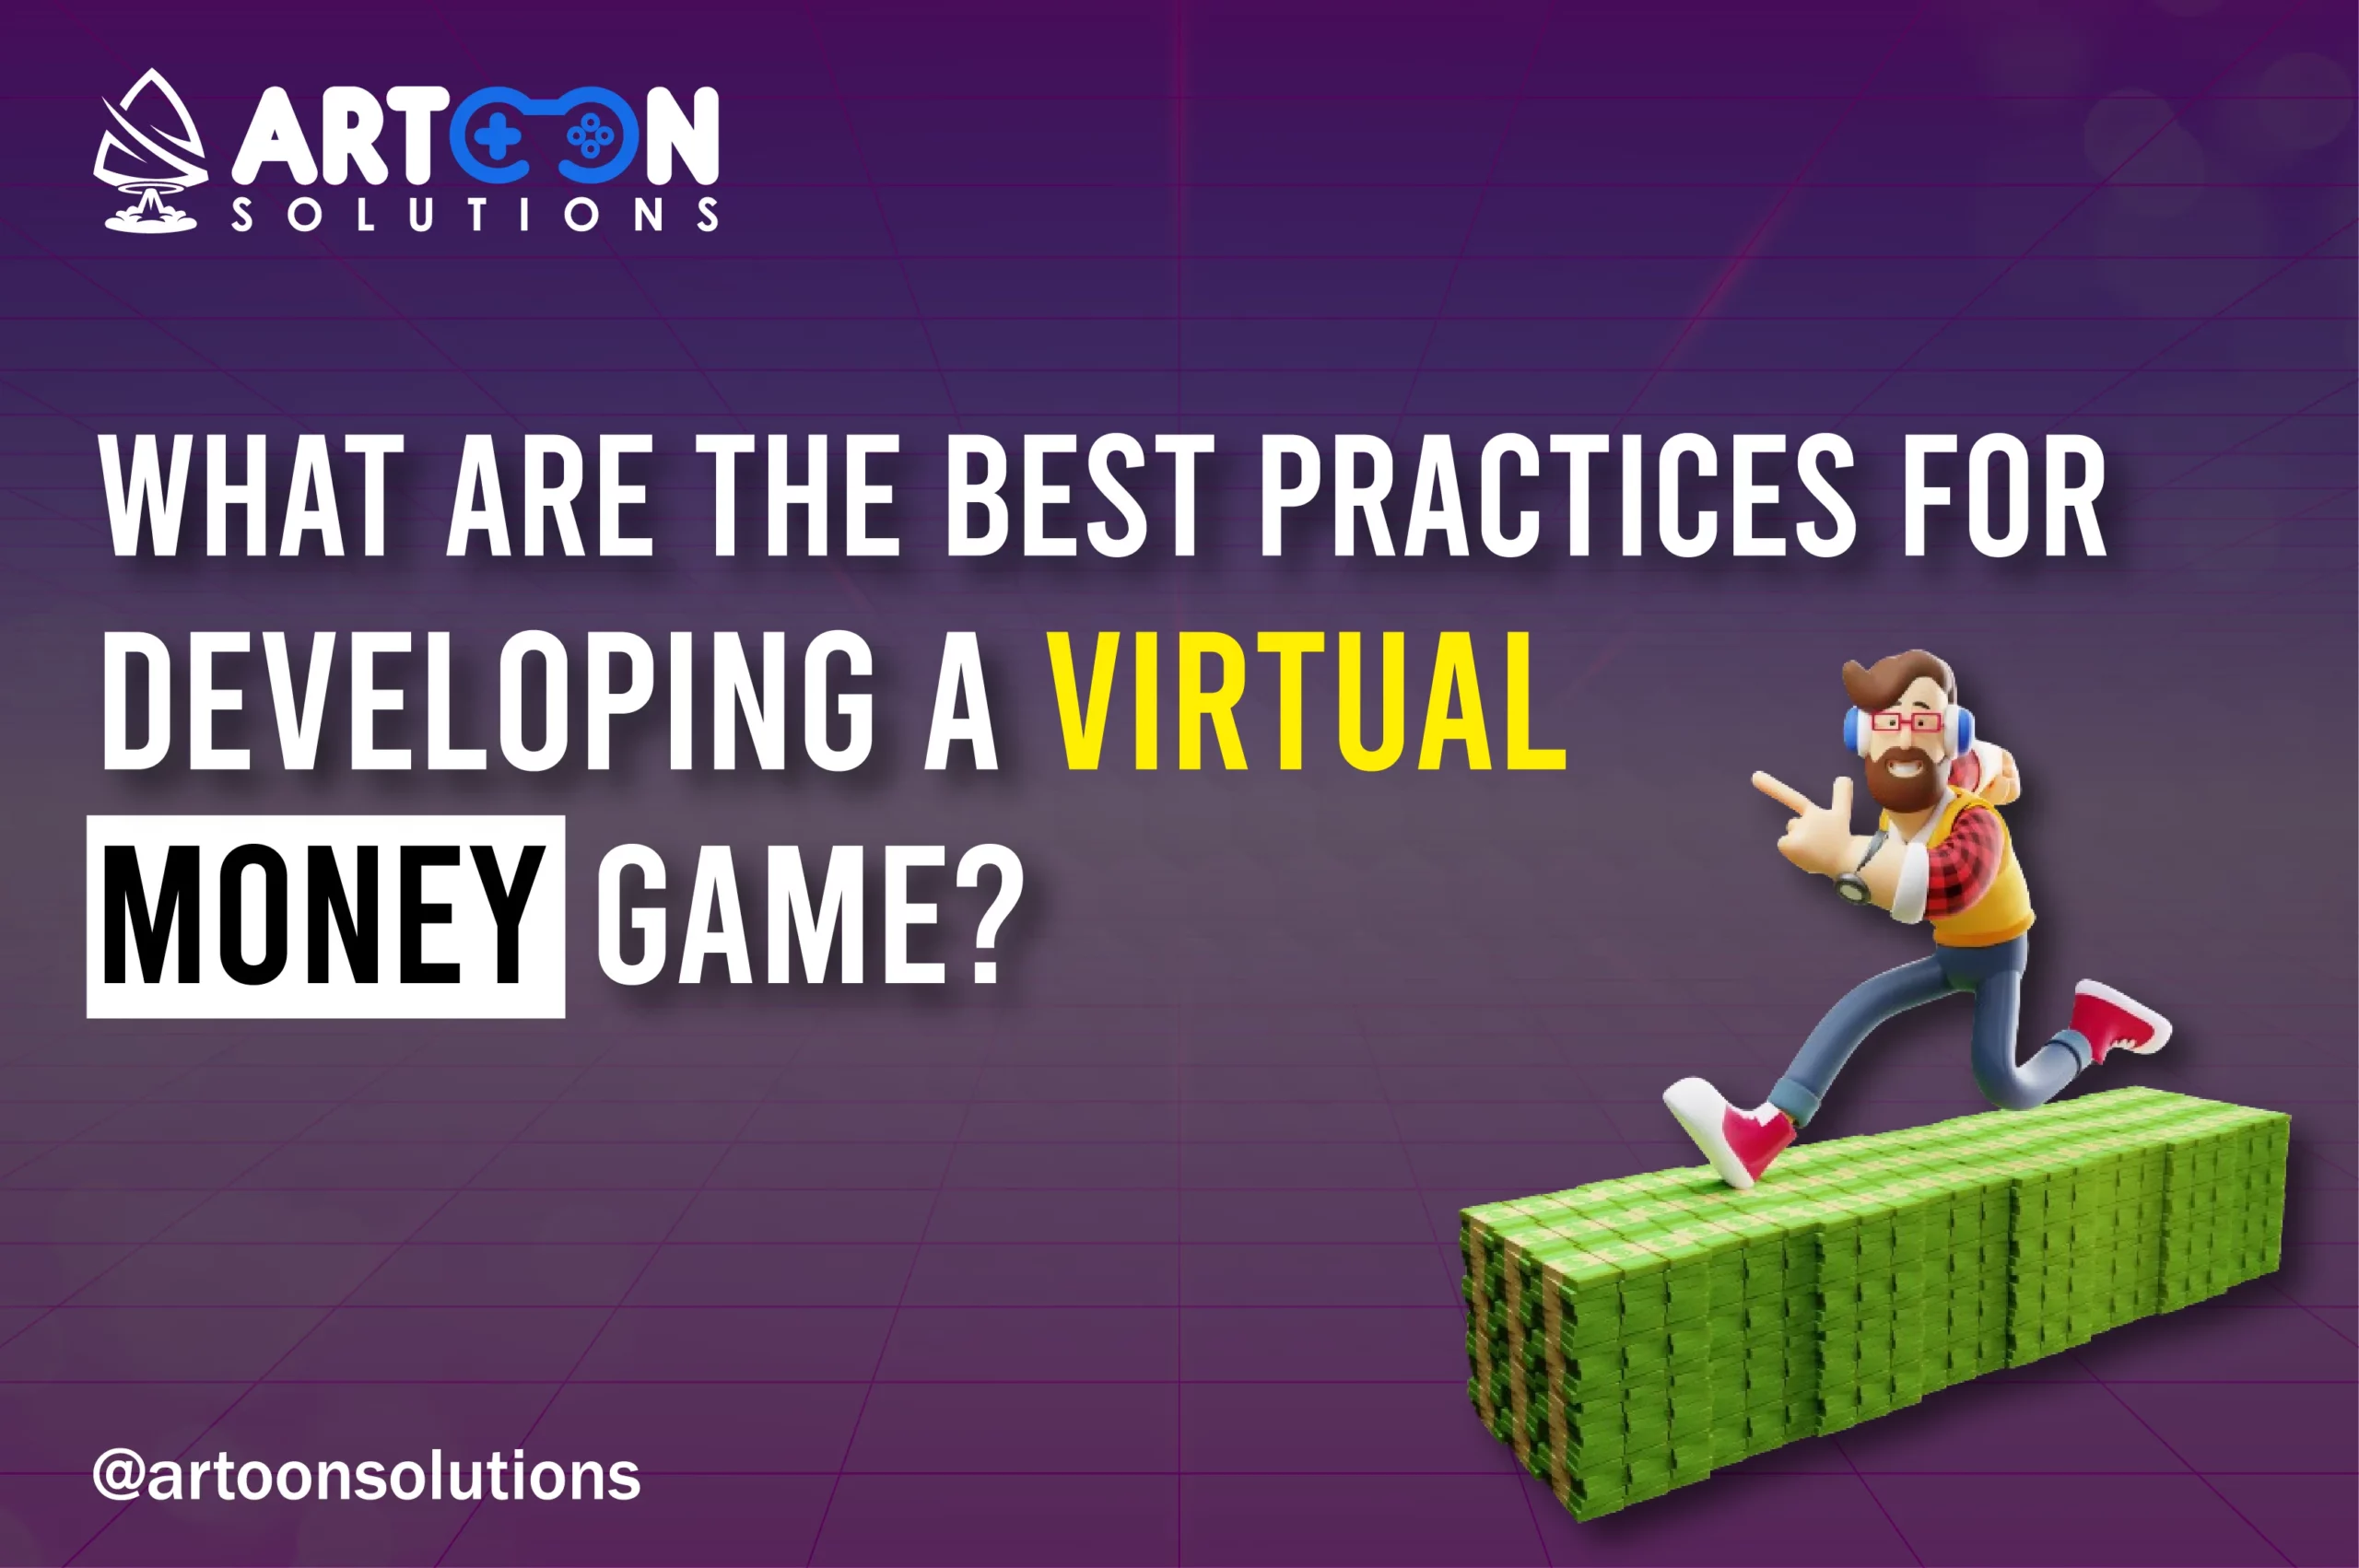 What are the best practices for developing a virtual money game